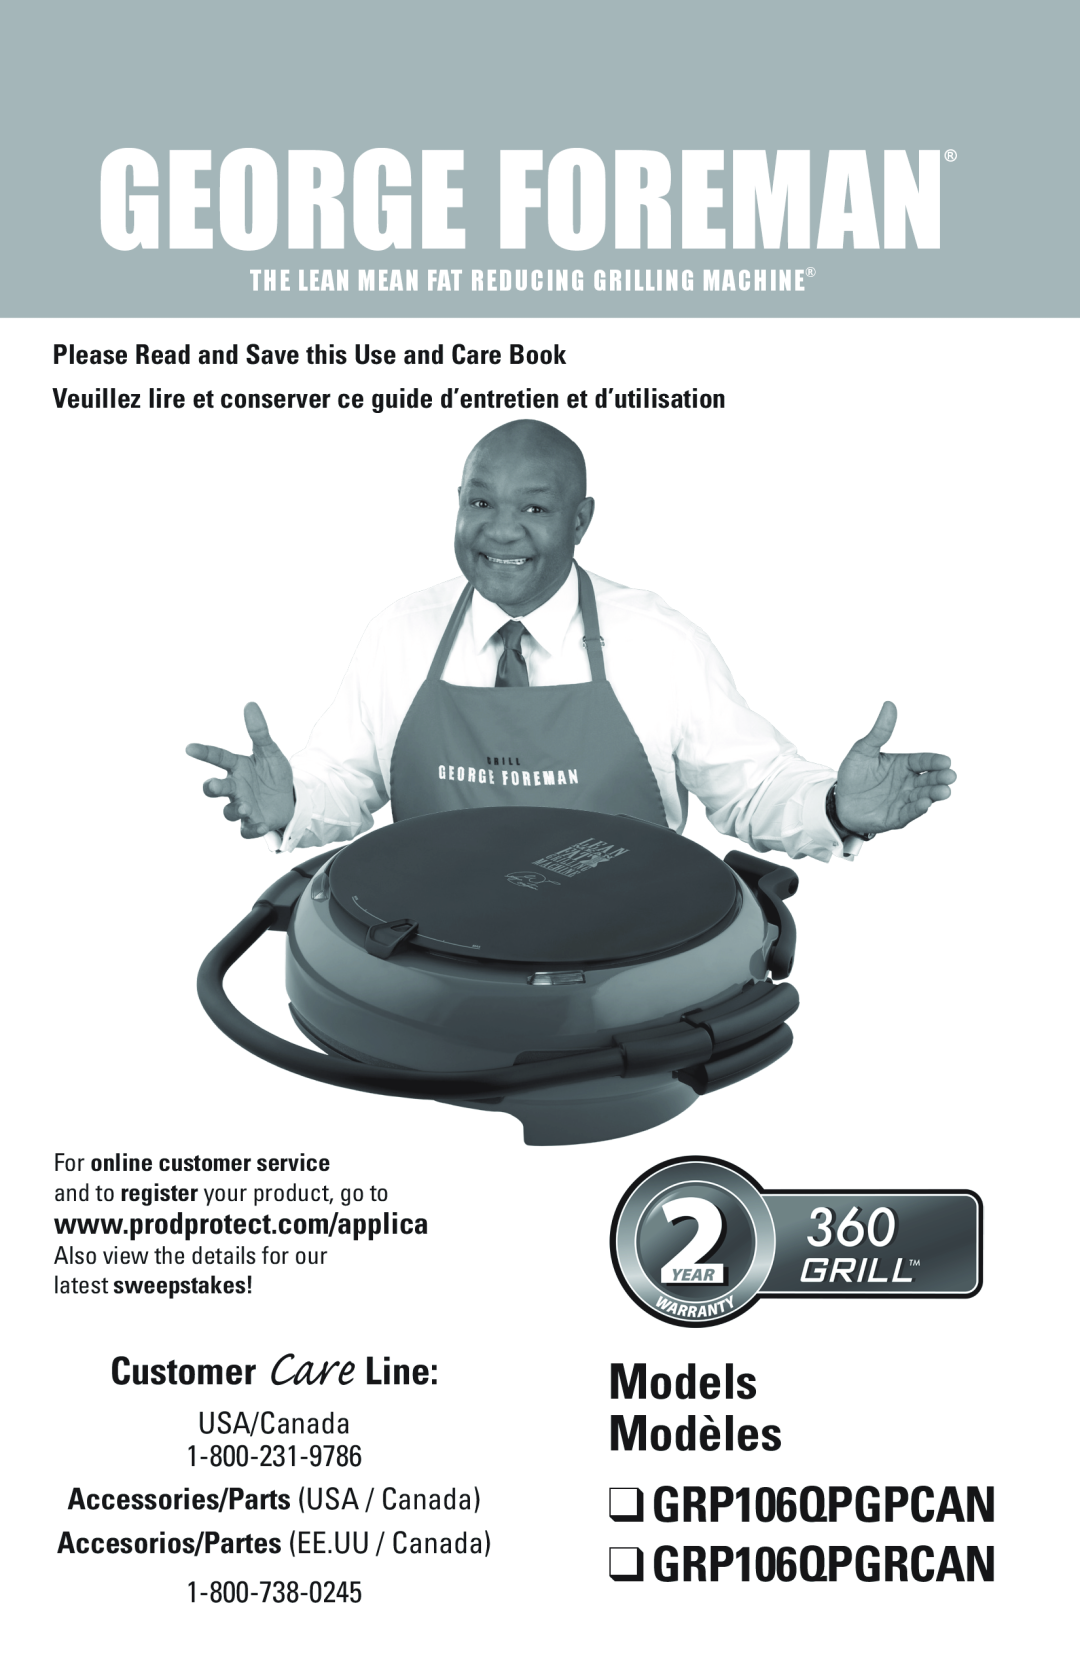 George Foreman manual Models Modèles, GRP106QPGPCAN GRP106QPGRCAN, Customer Care Line, For online customer service 